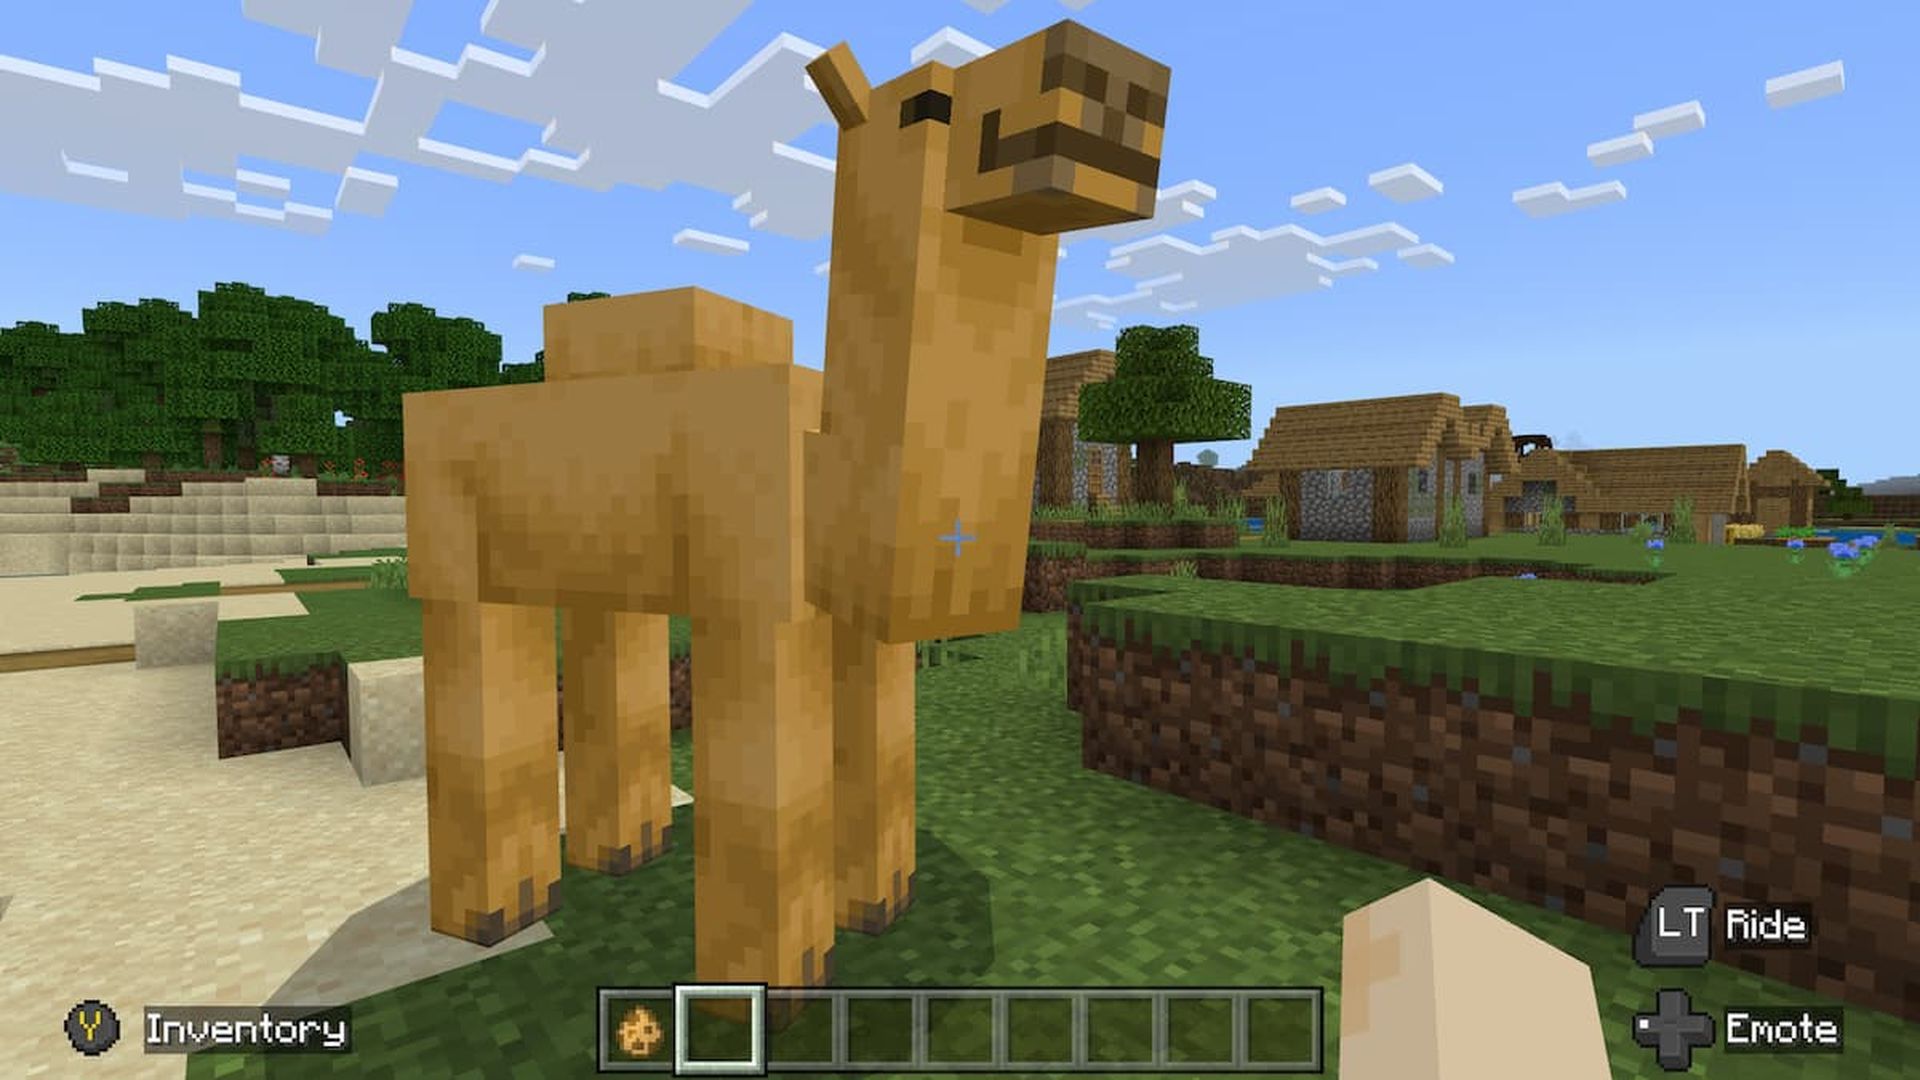 What do camels eat in Minecraft